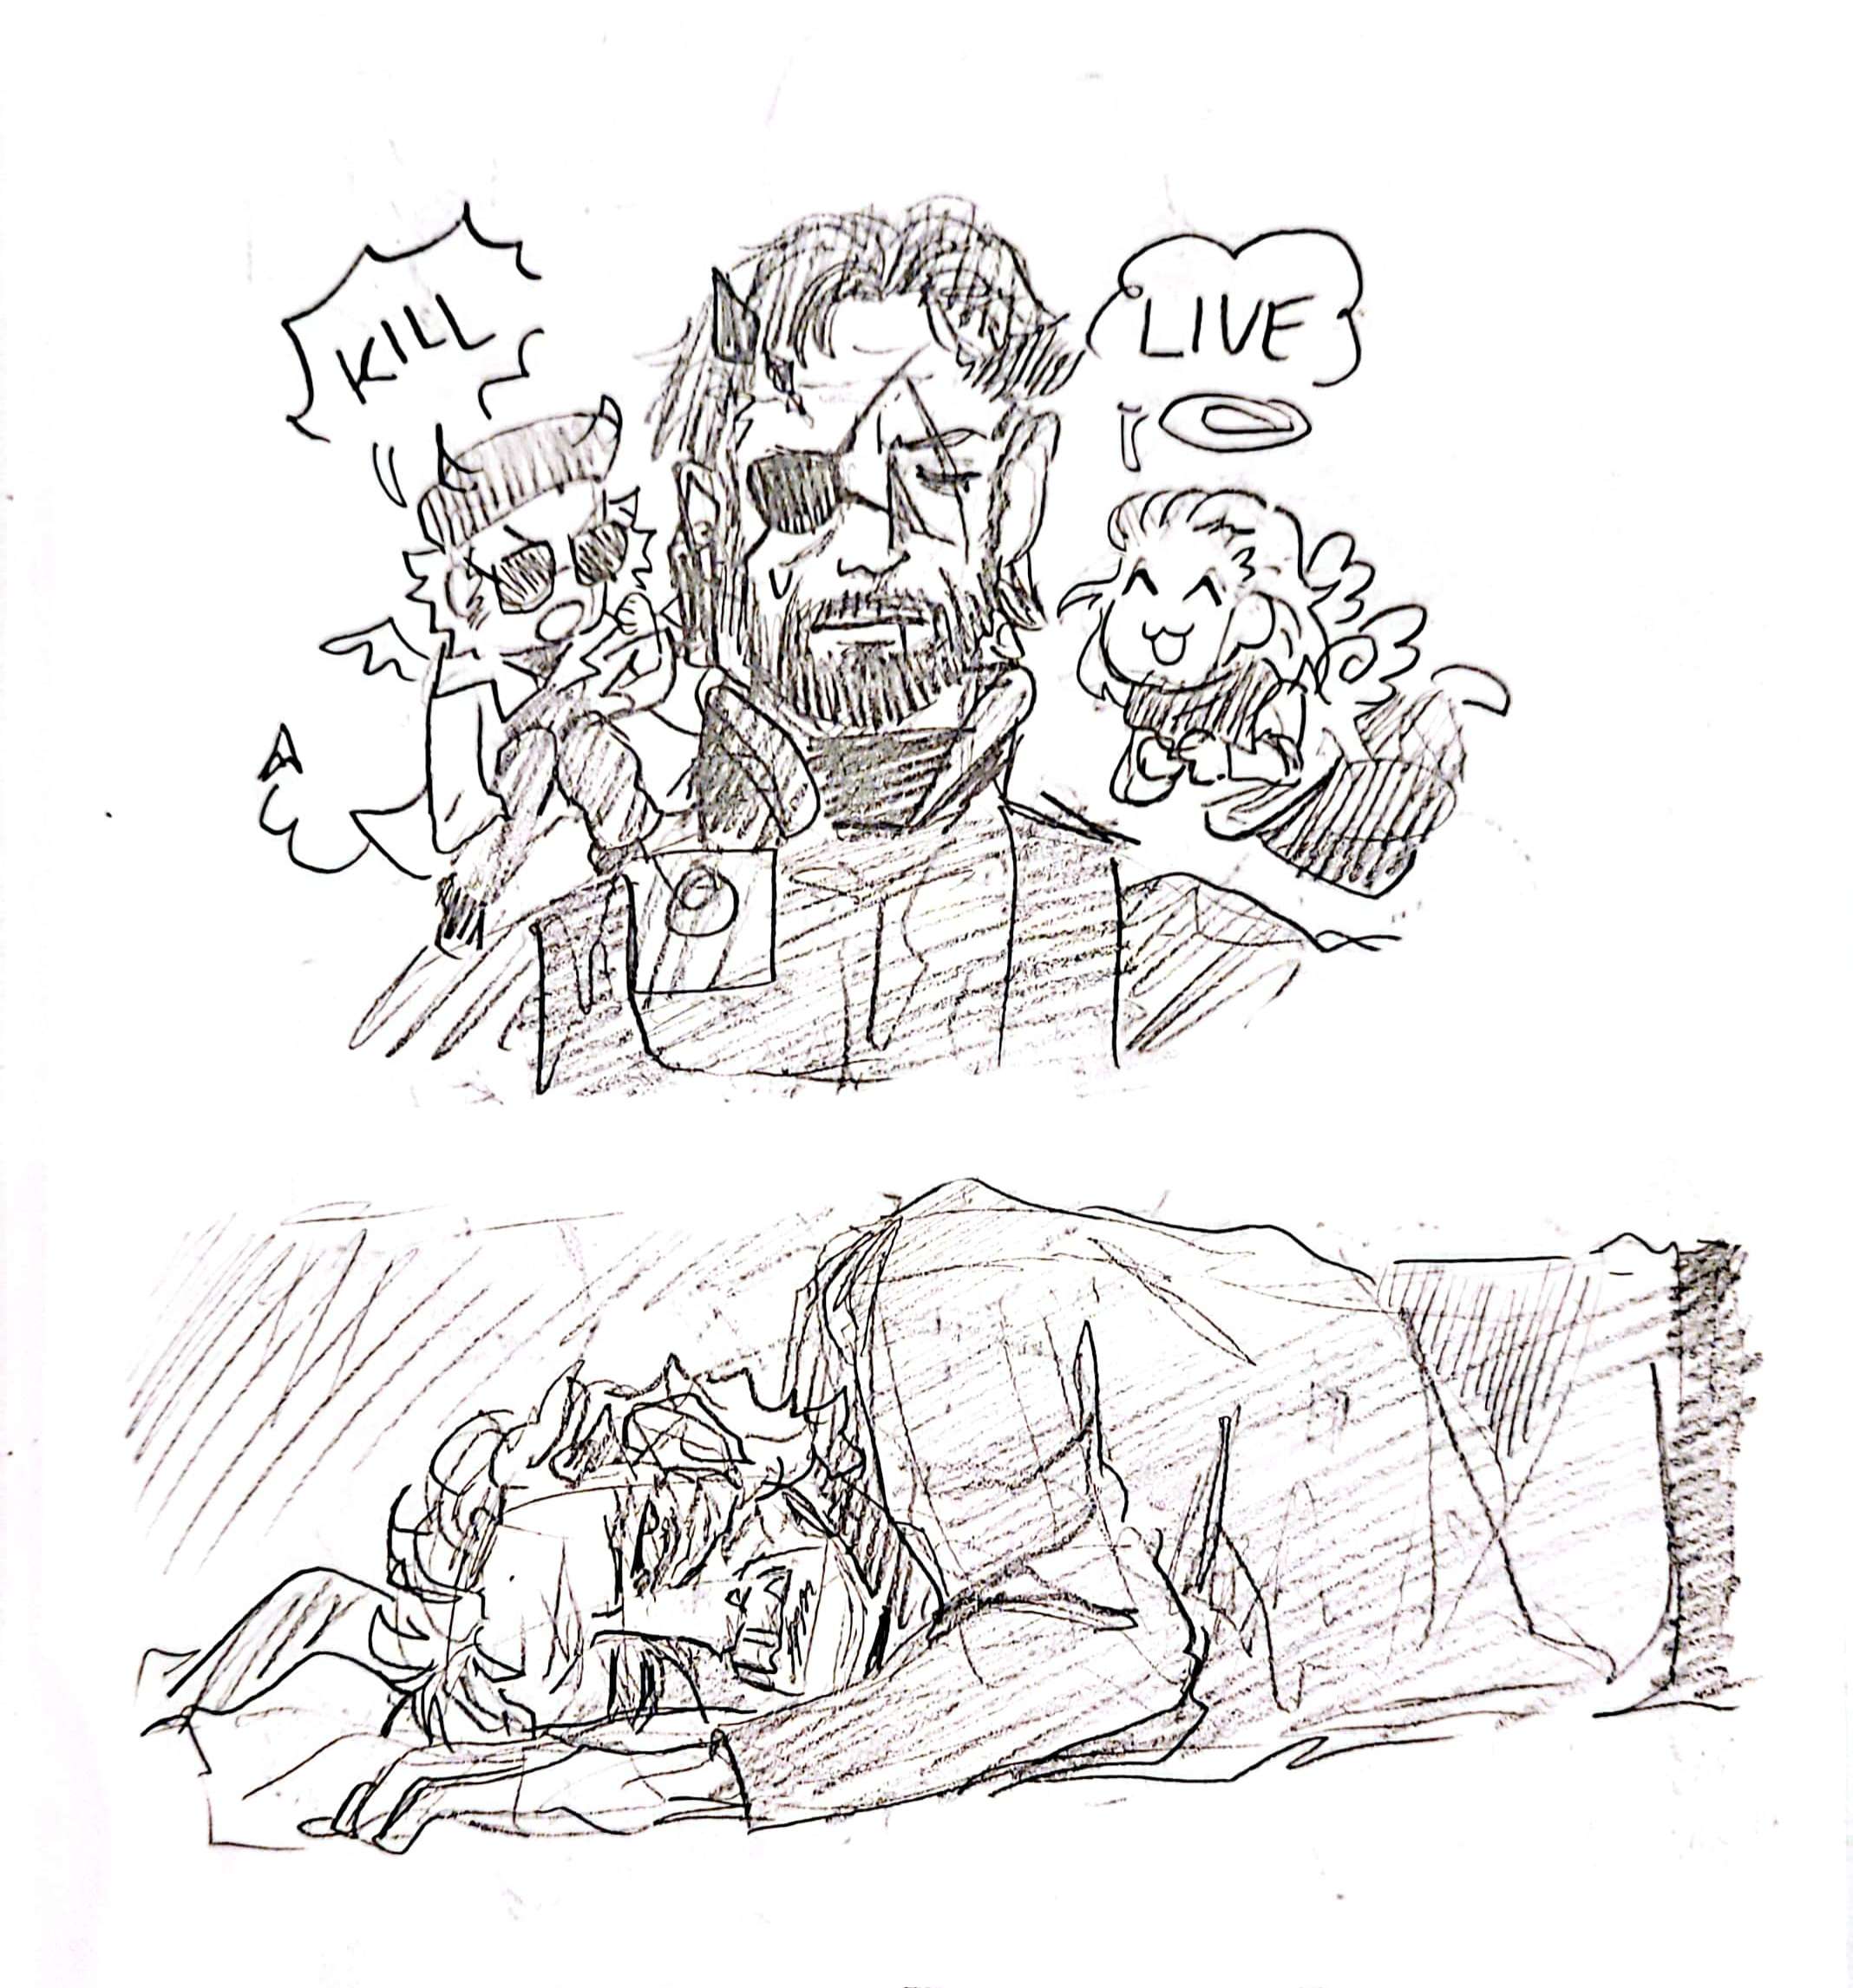 On top of the page, Venom Snake with an angel Ocelot and demon Kaz on his shoulders saying 'KILL' and 'LIVE' respectively; below is a sketch of Old Snake in casual wear lying down, looking worn